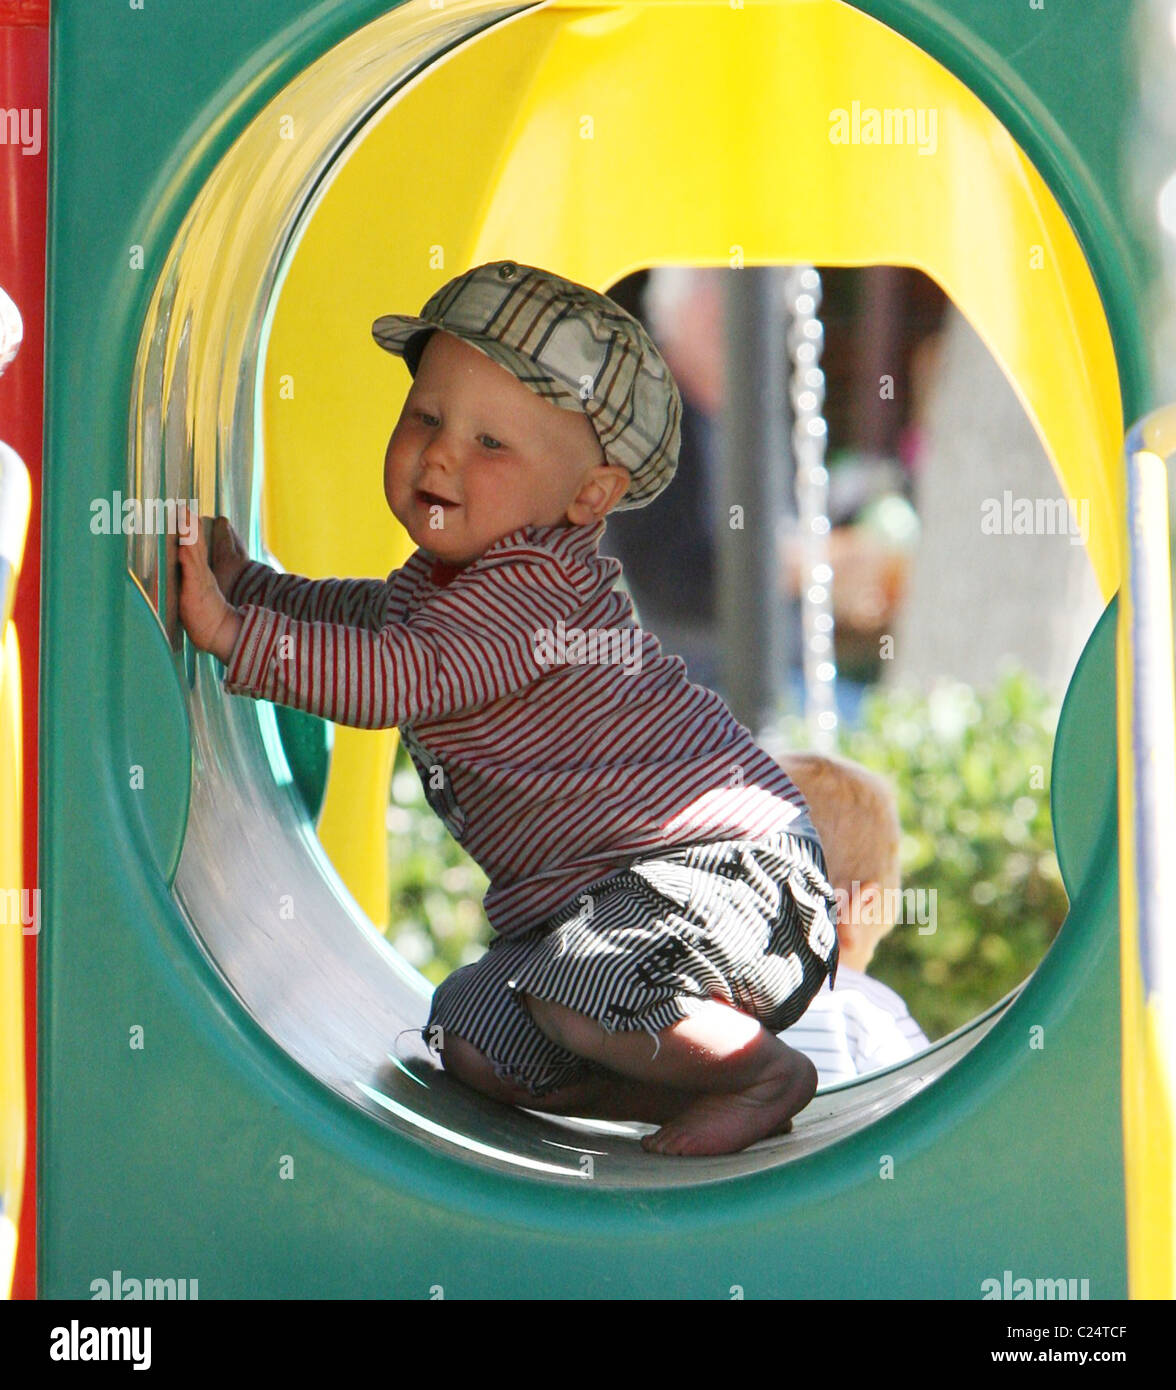 Henry Story Driver Minnie Driver and son Henry spend time together in Cross Creek Park in Malibu Malibu, California - 27.10.09 Stock Photo